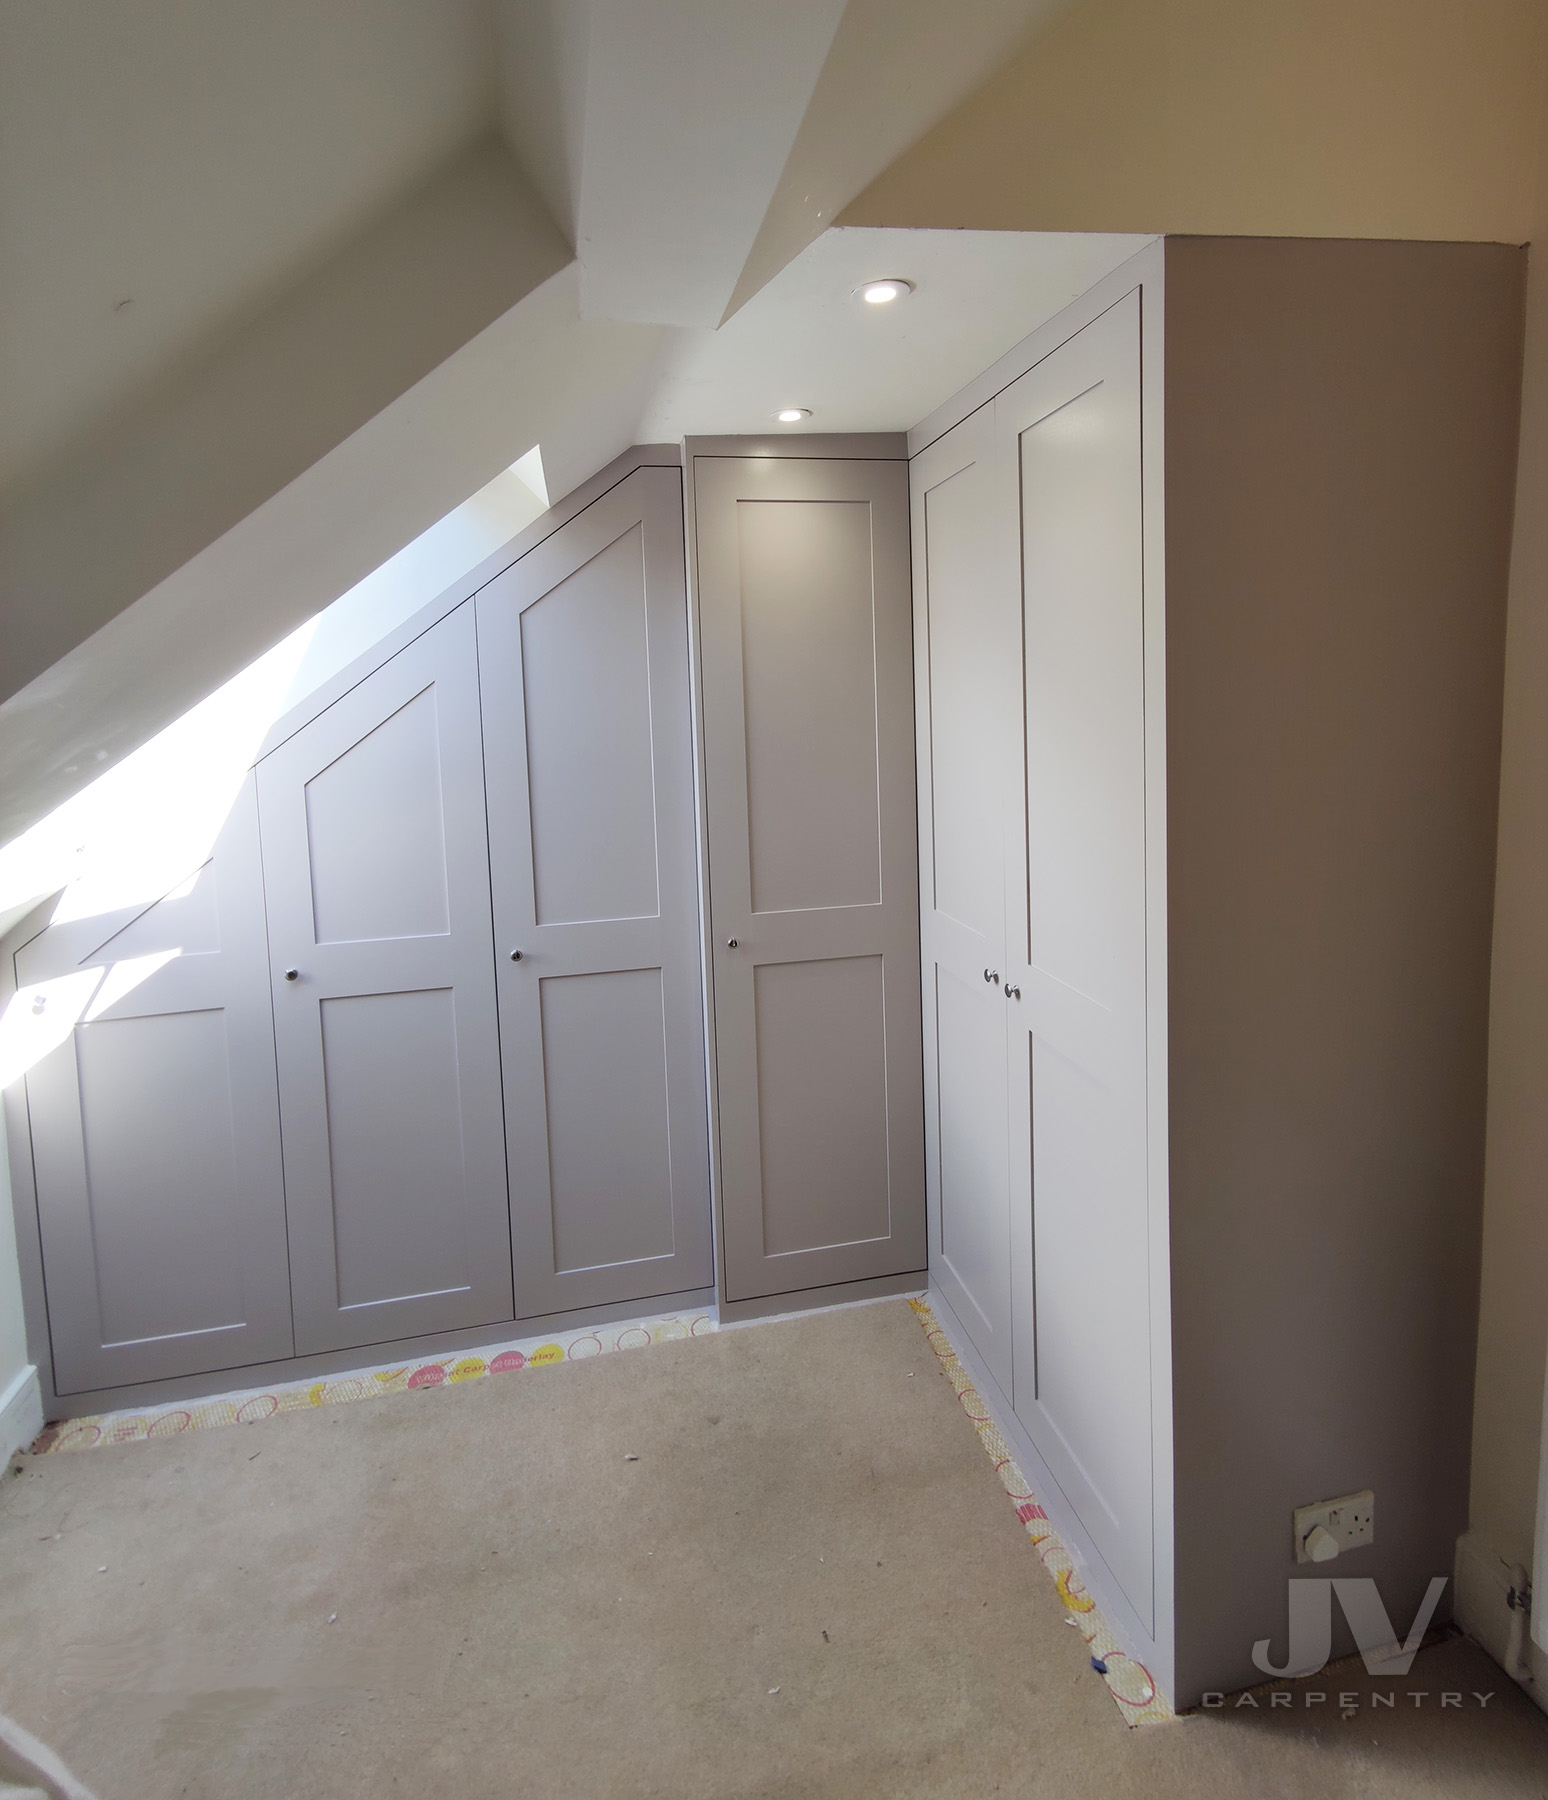 L-shaped fitted wardrobes in the Loft